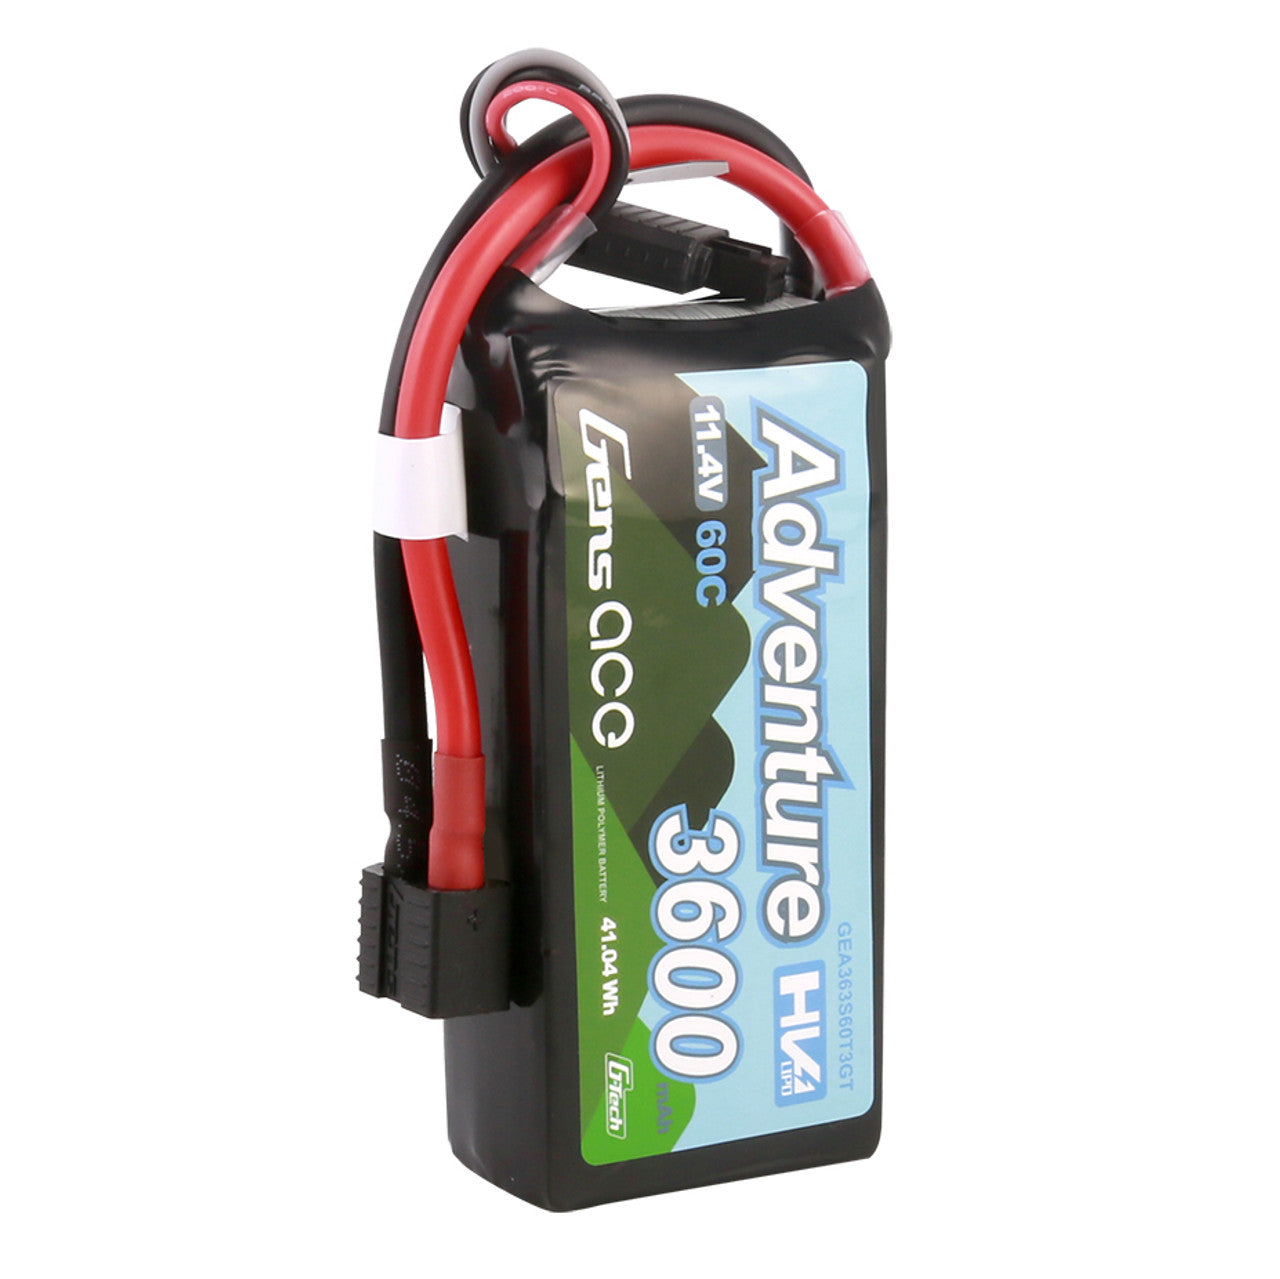 GEA363S60T3GT Gens Ace Adventure High Voltage 3600mAh 3S1P 11.4V 60C G-Tech Lipo Battery With Deans And XT60 Adapter